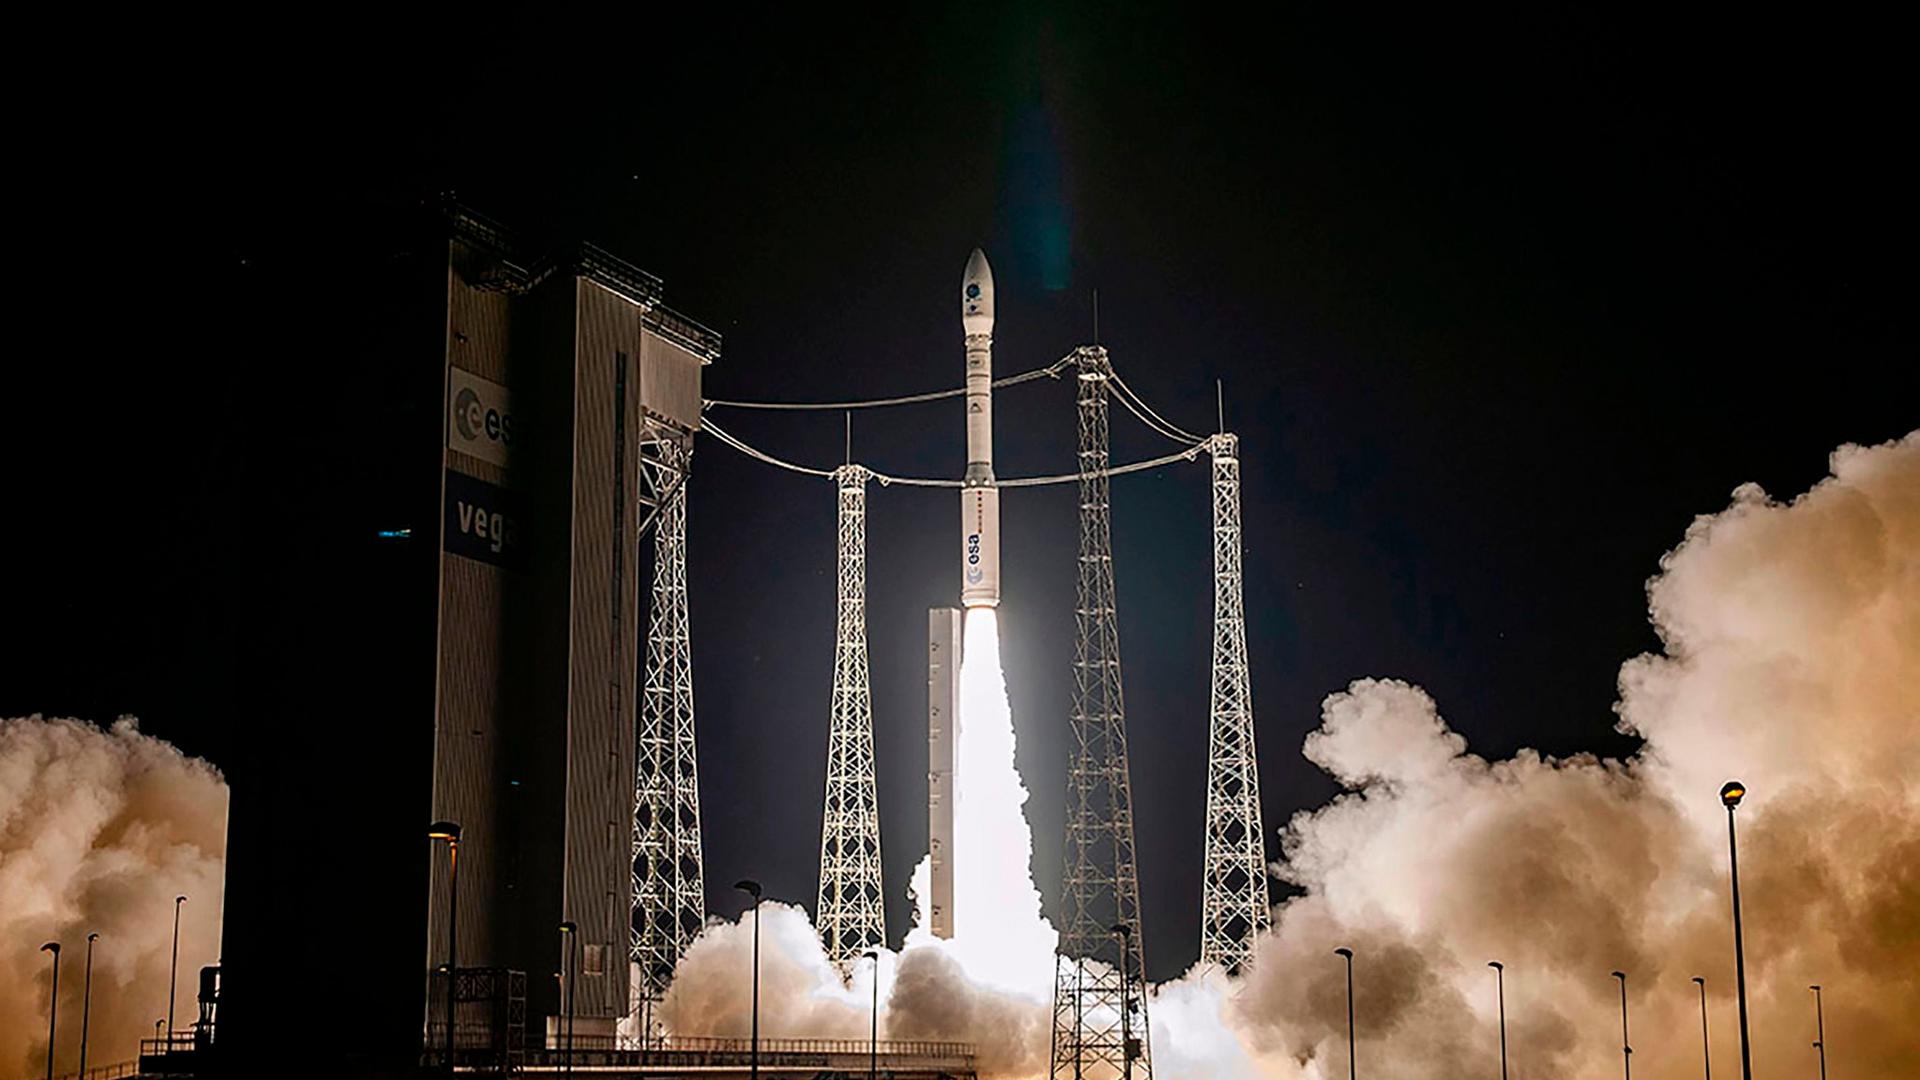 A Vega rocket launched in September from French Guiana carrying a Luxembourg satellite Photo: AFP